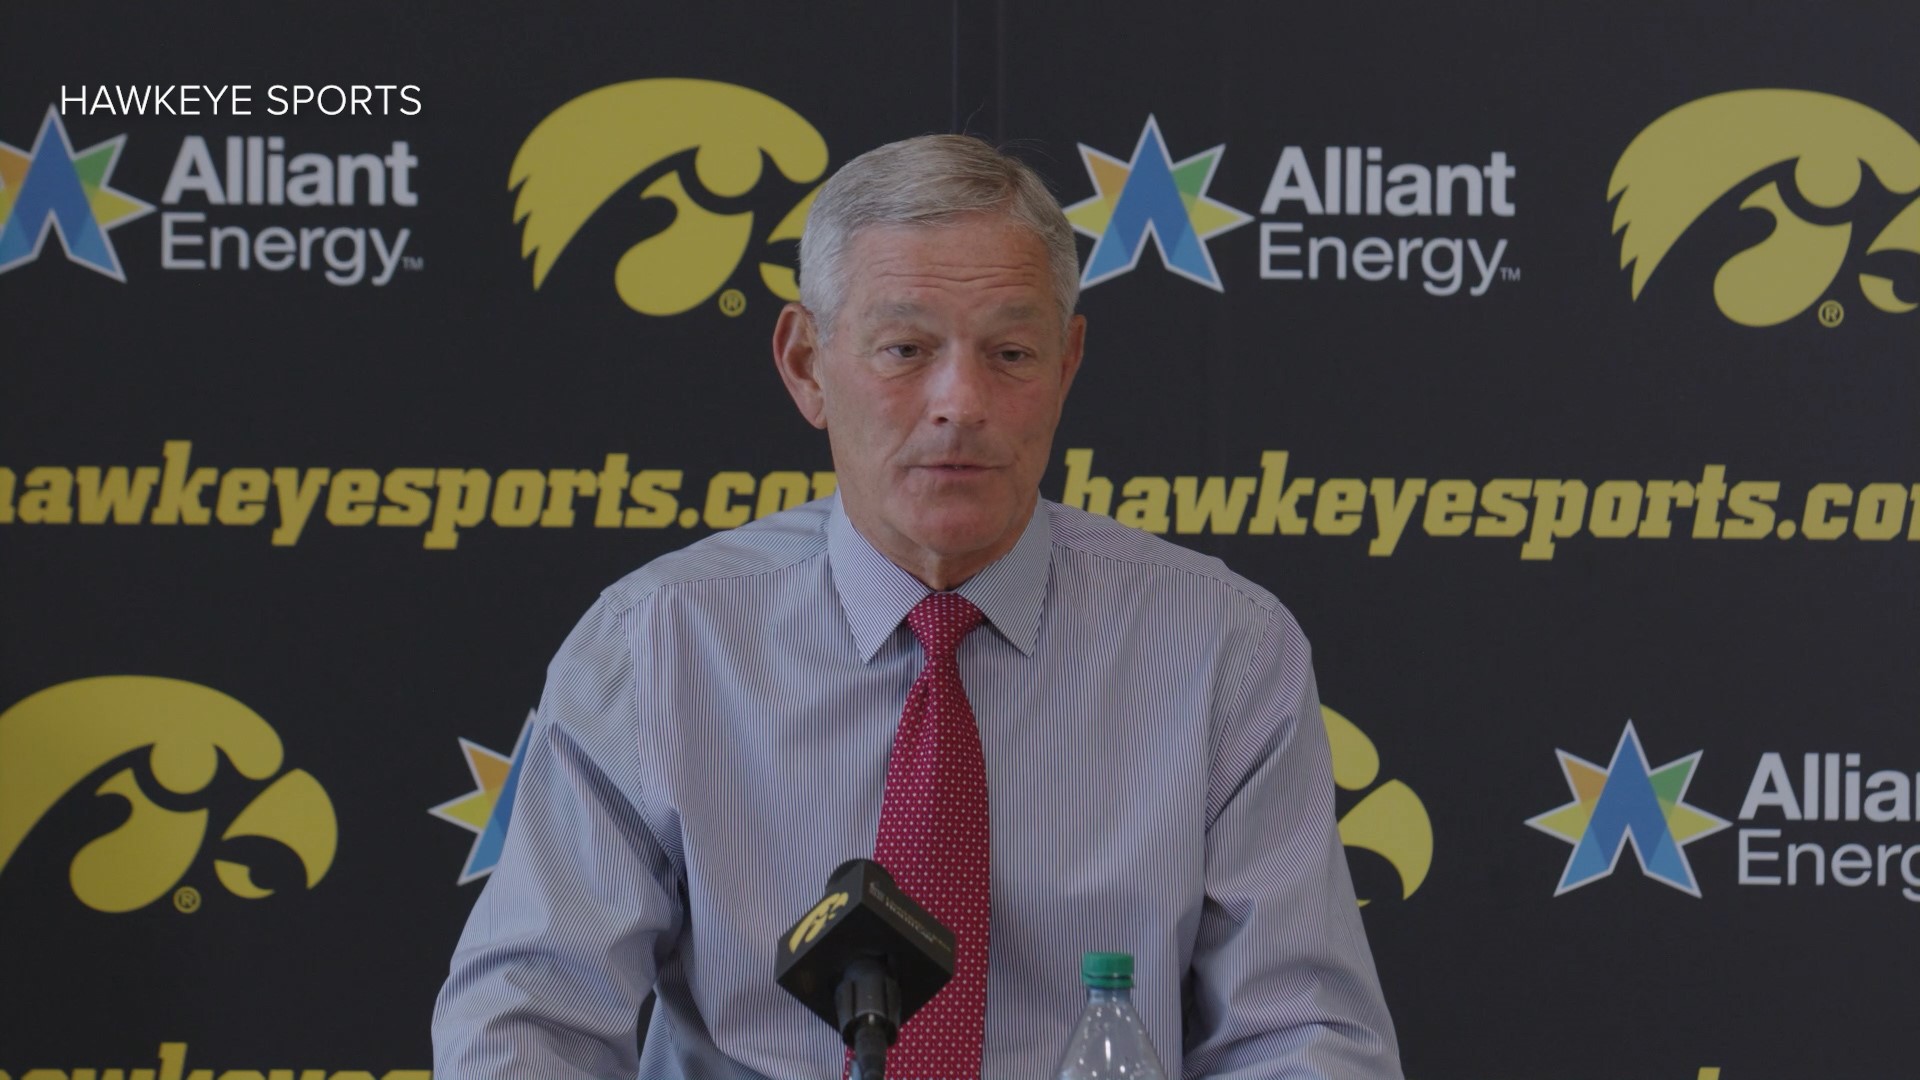 The Hawkeyes are 1-1 on the season and coming off a disappointing home loss to Iowa State.